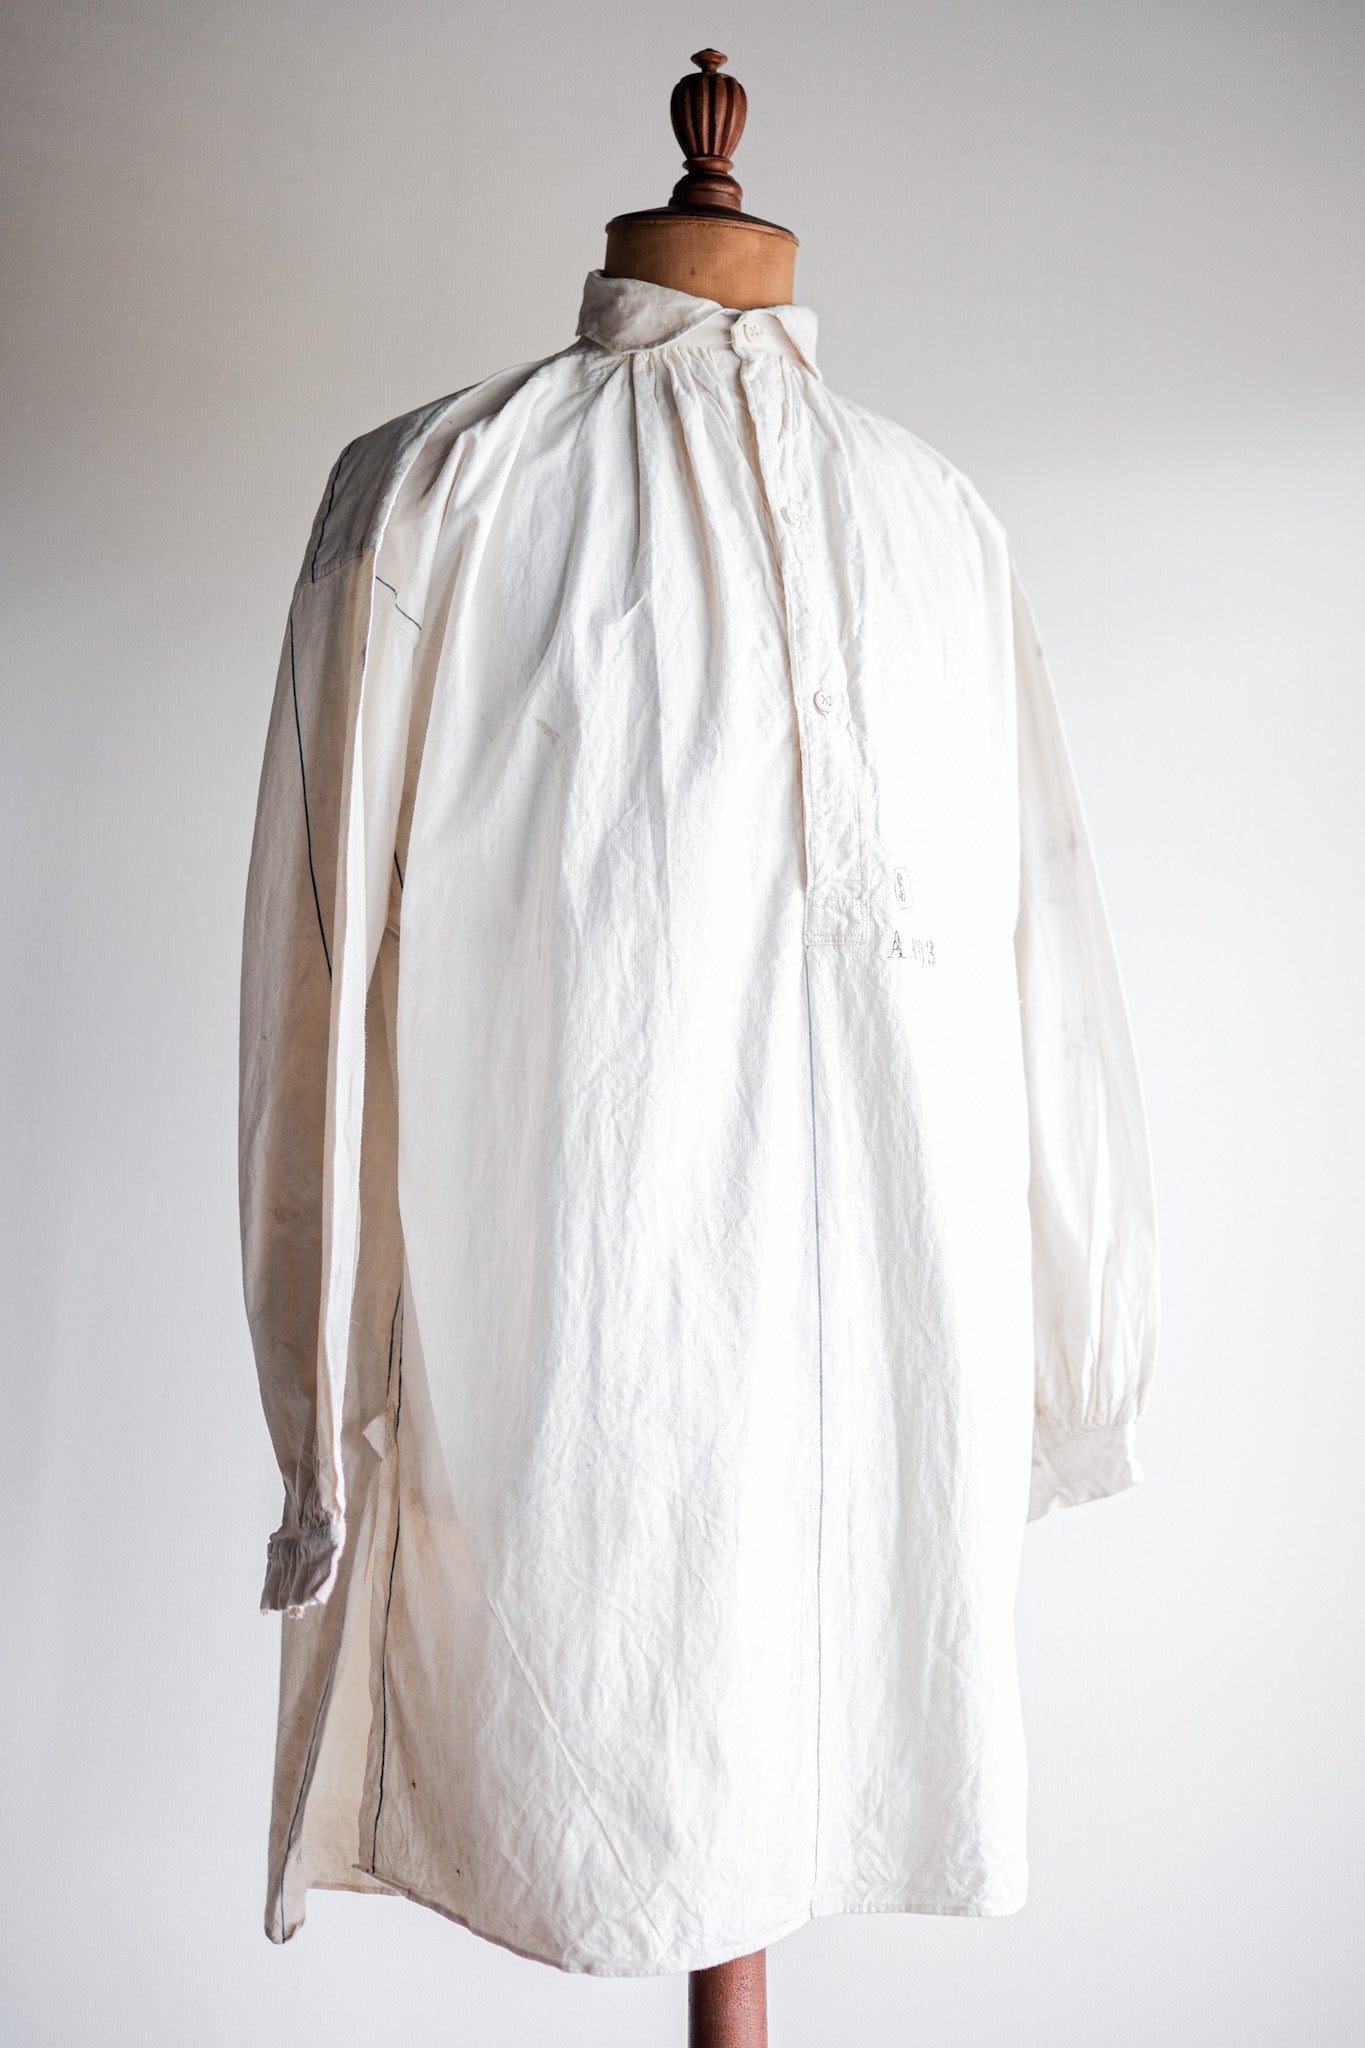 [Late 19th C] French Army of Africa Cotton Linen Coronial Shirt "Dead Stock"